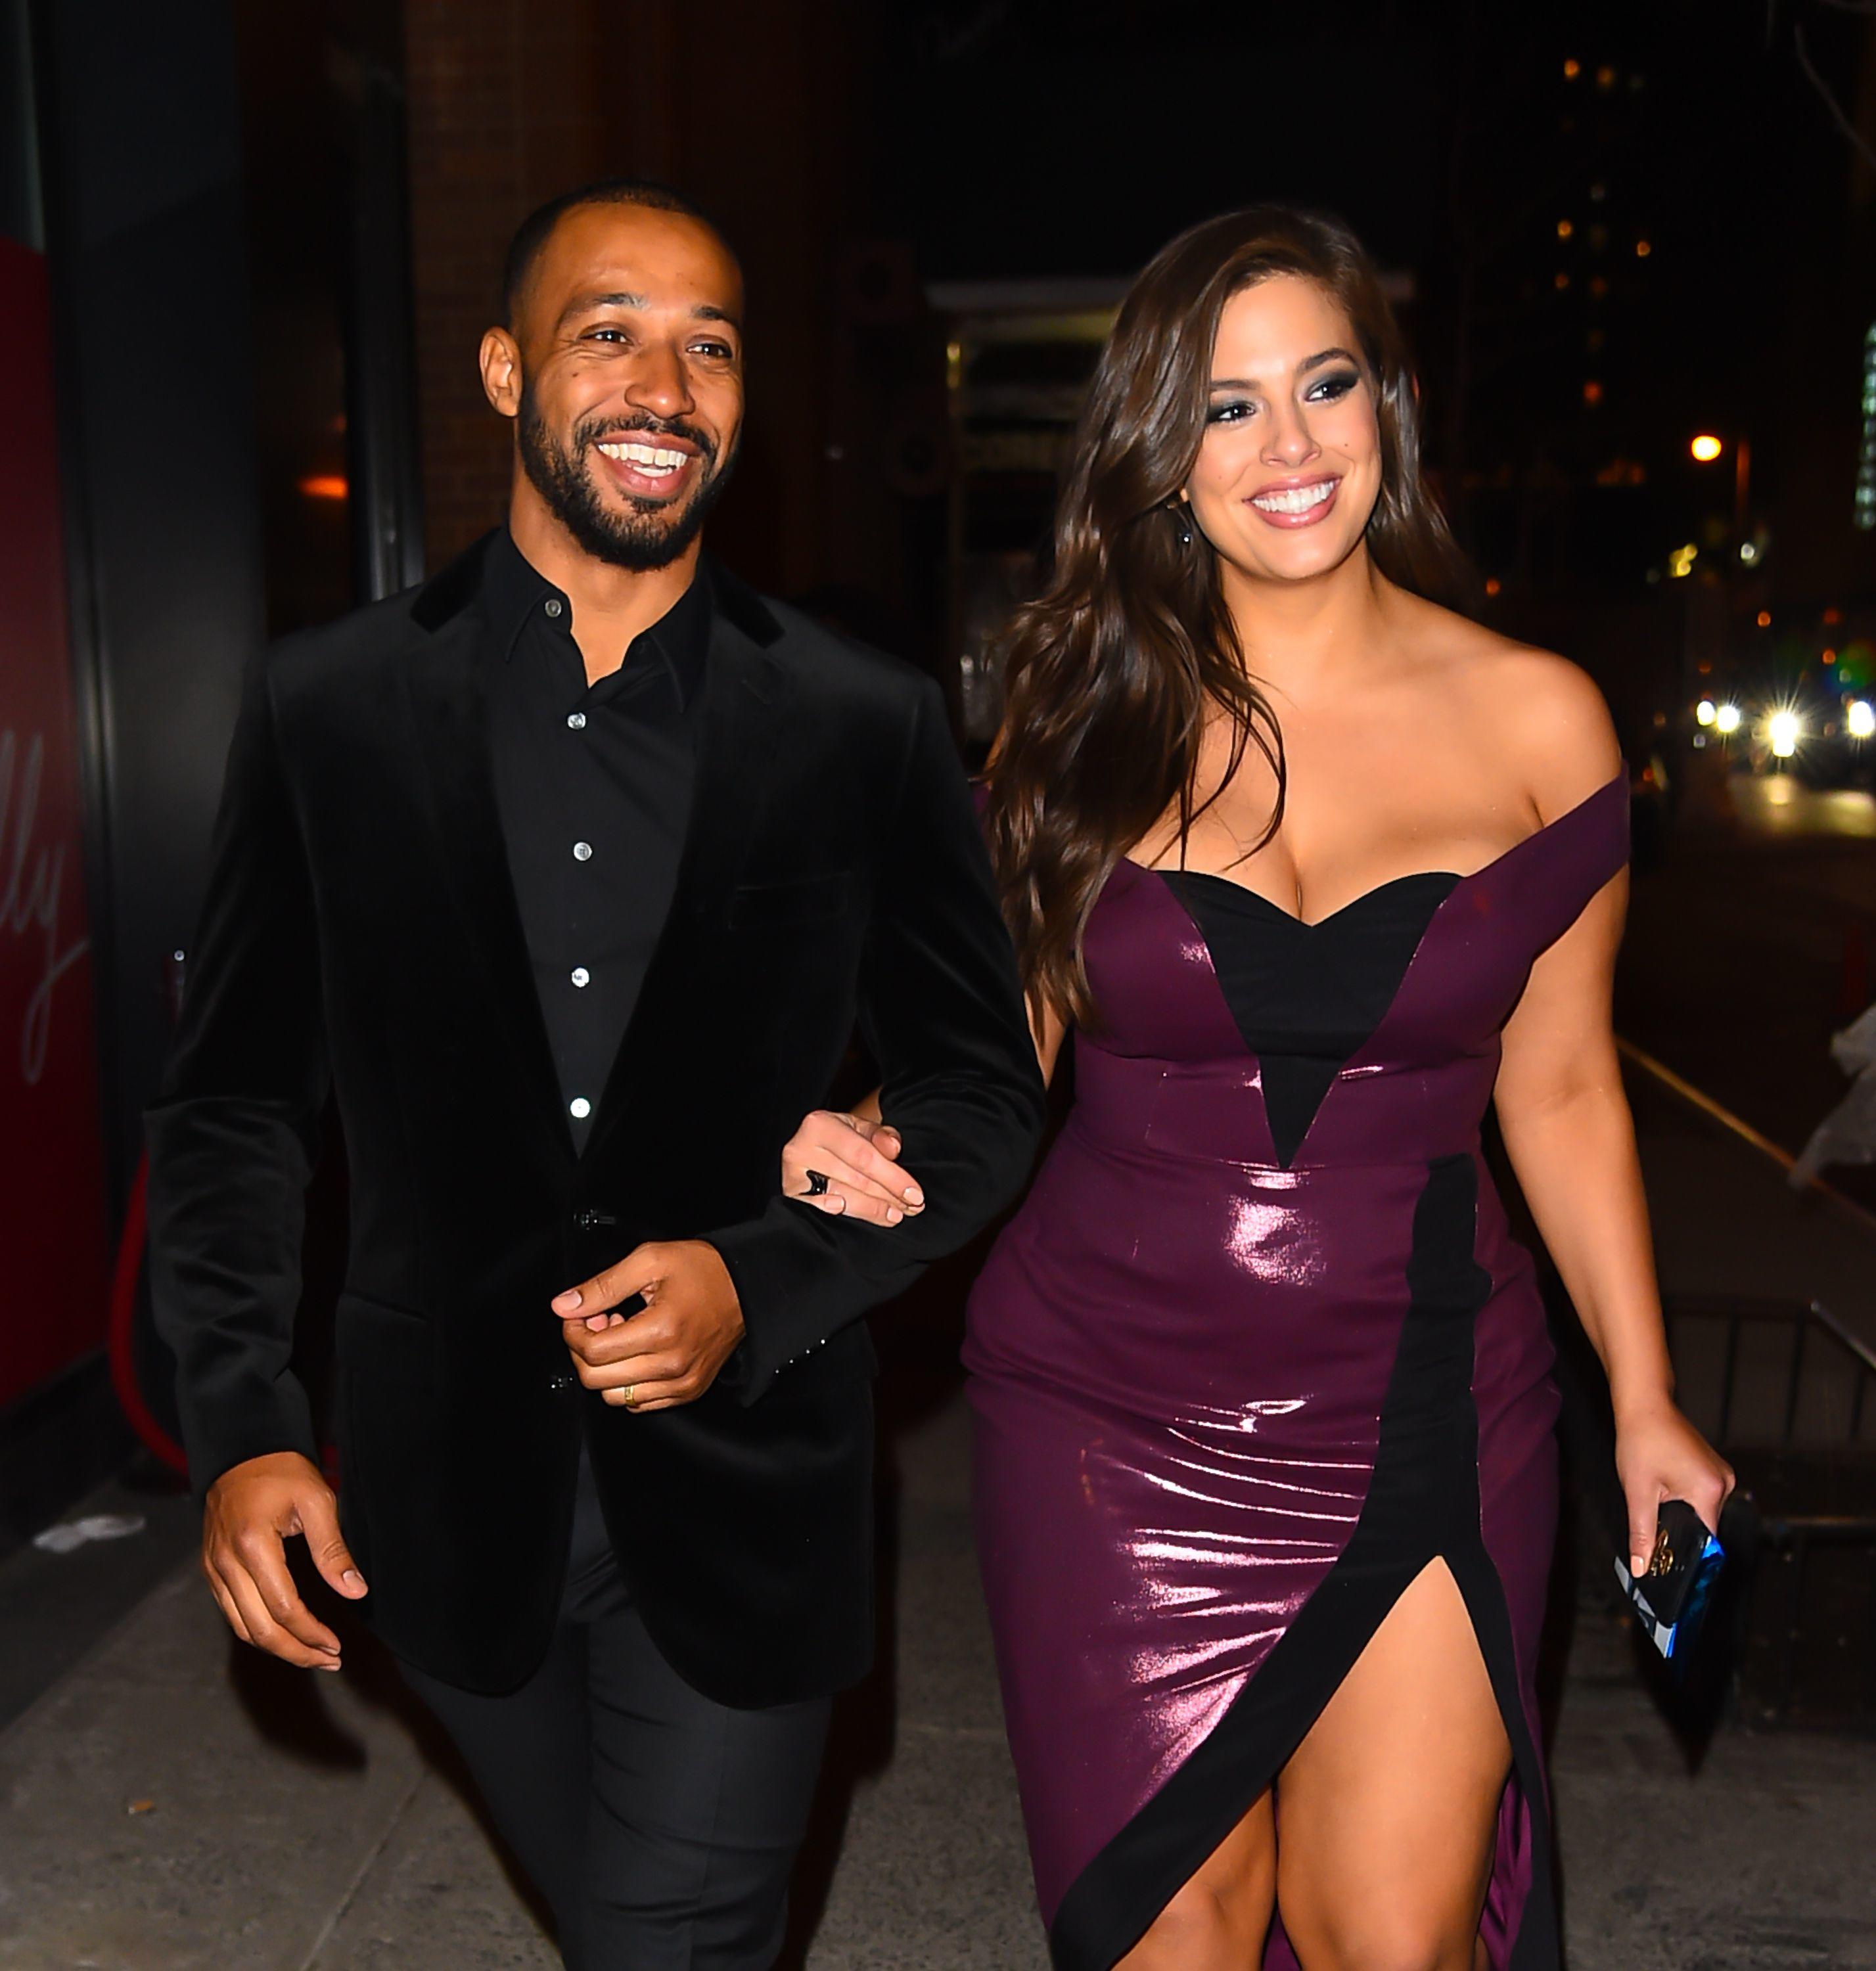 ashley-graham-is-seen-with-husband-justin-ervin-on-january-news-photo-909940194-1538076383